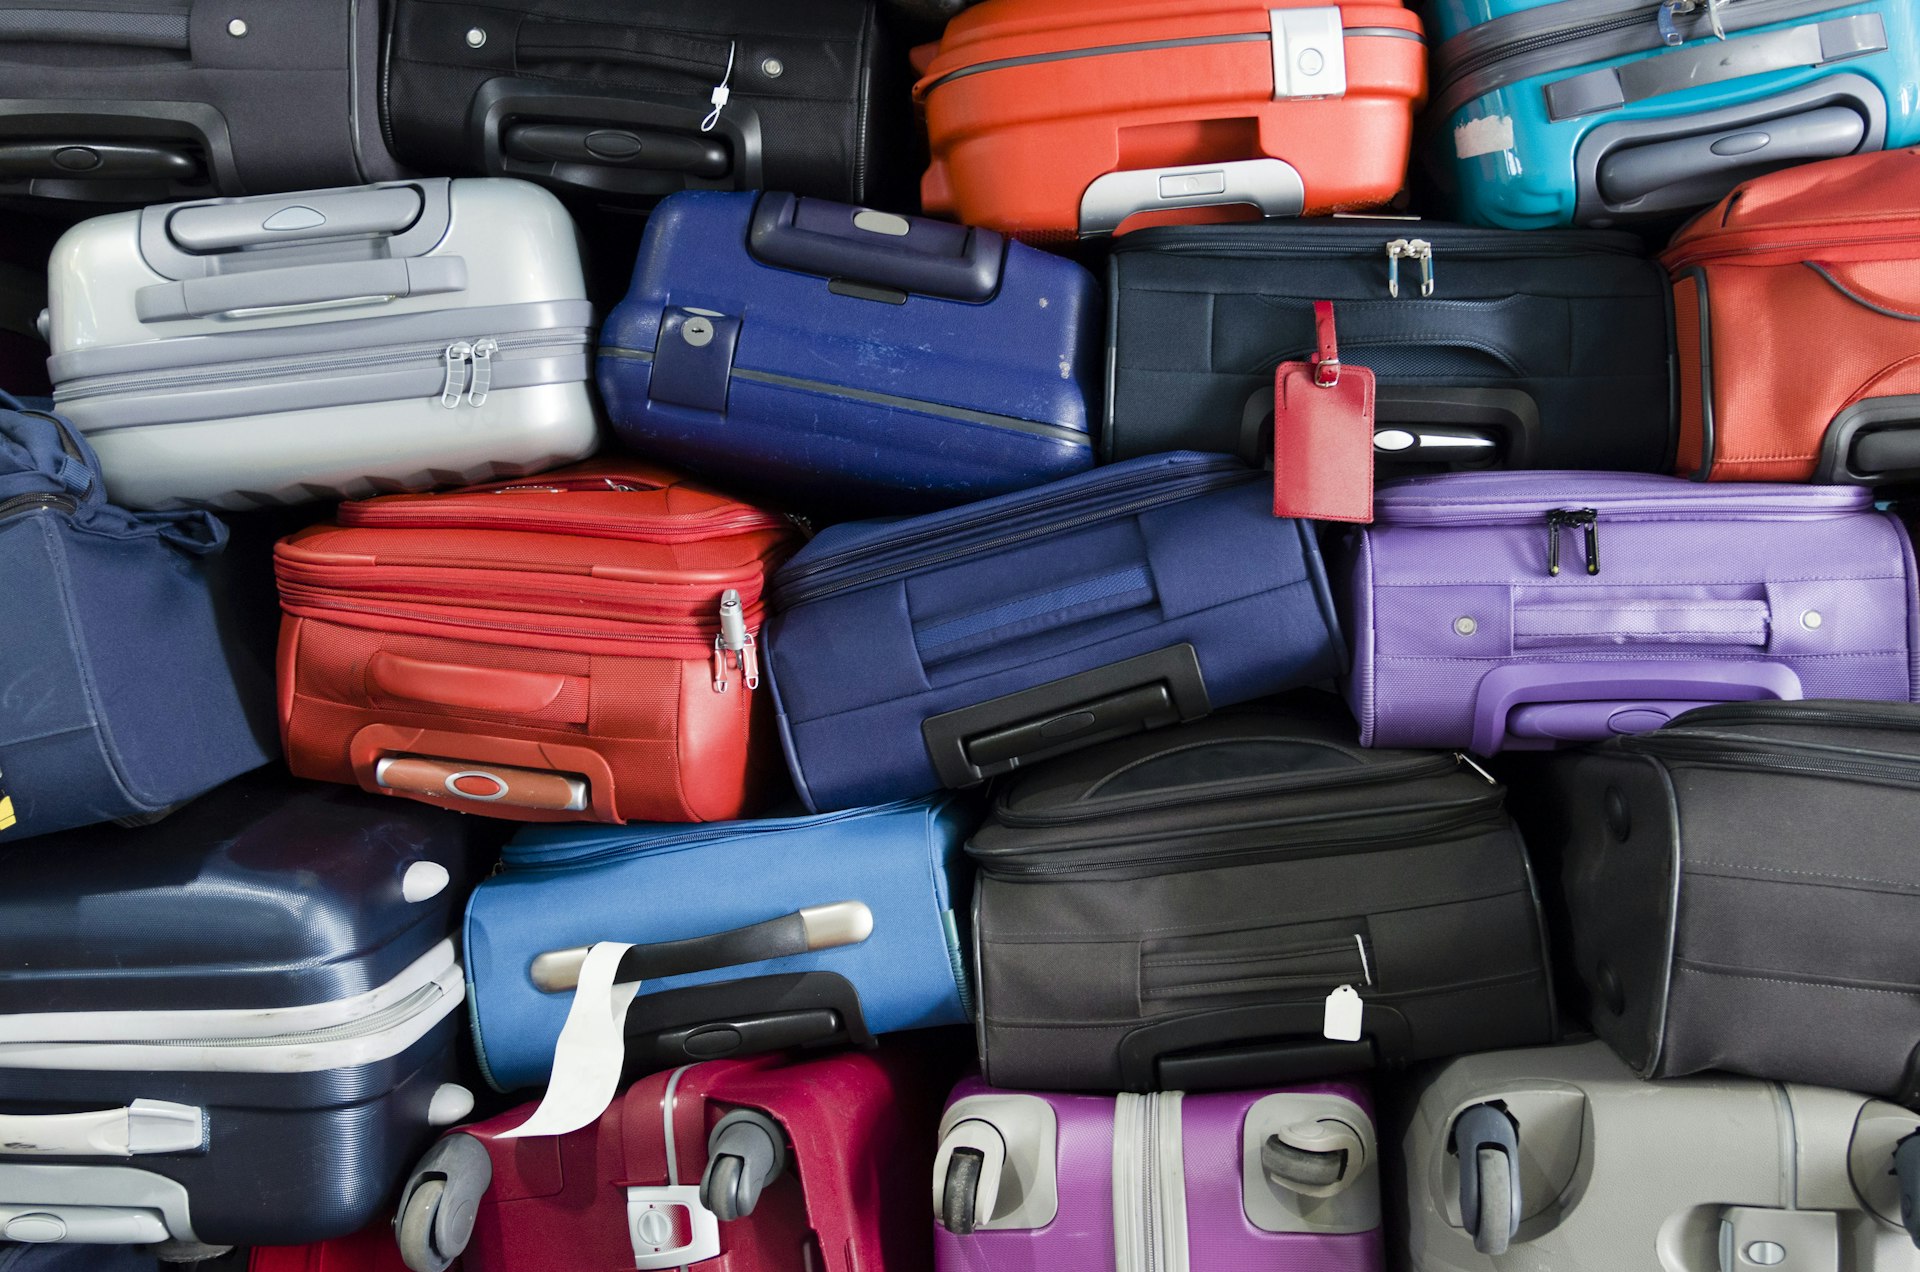 A pile of different coloured suitcases stacked on top of each other